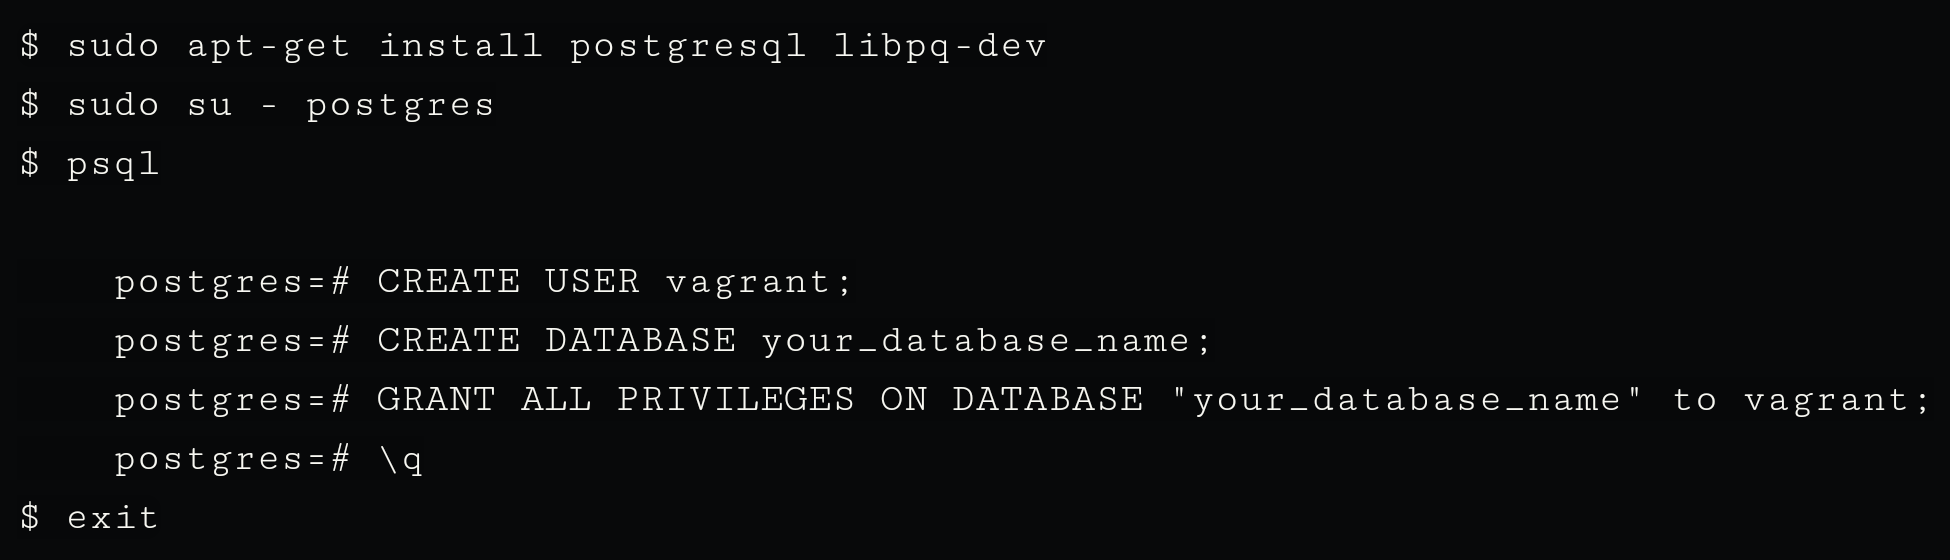  install your database.